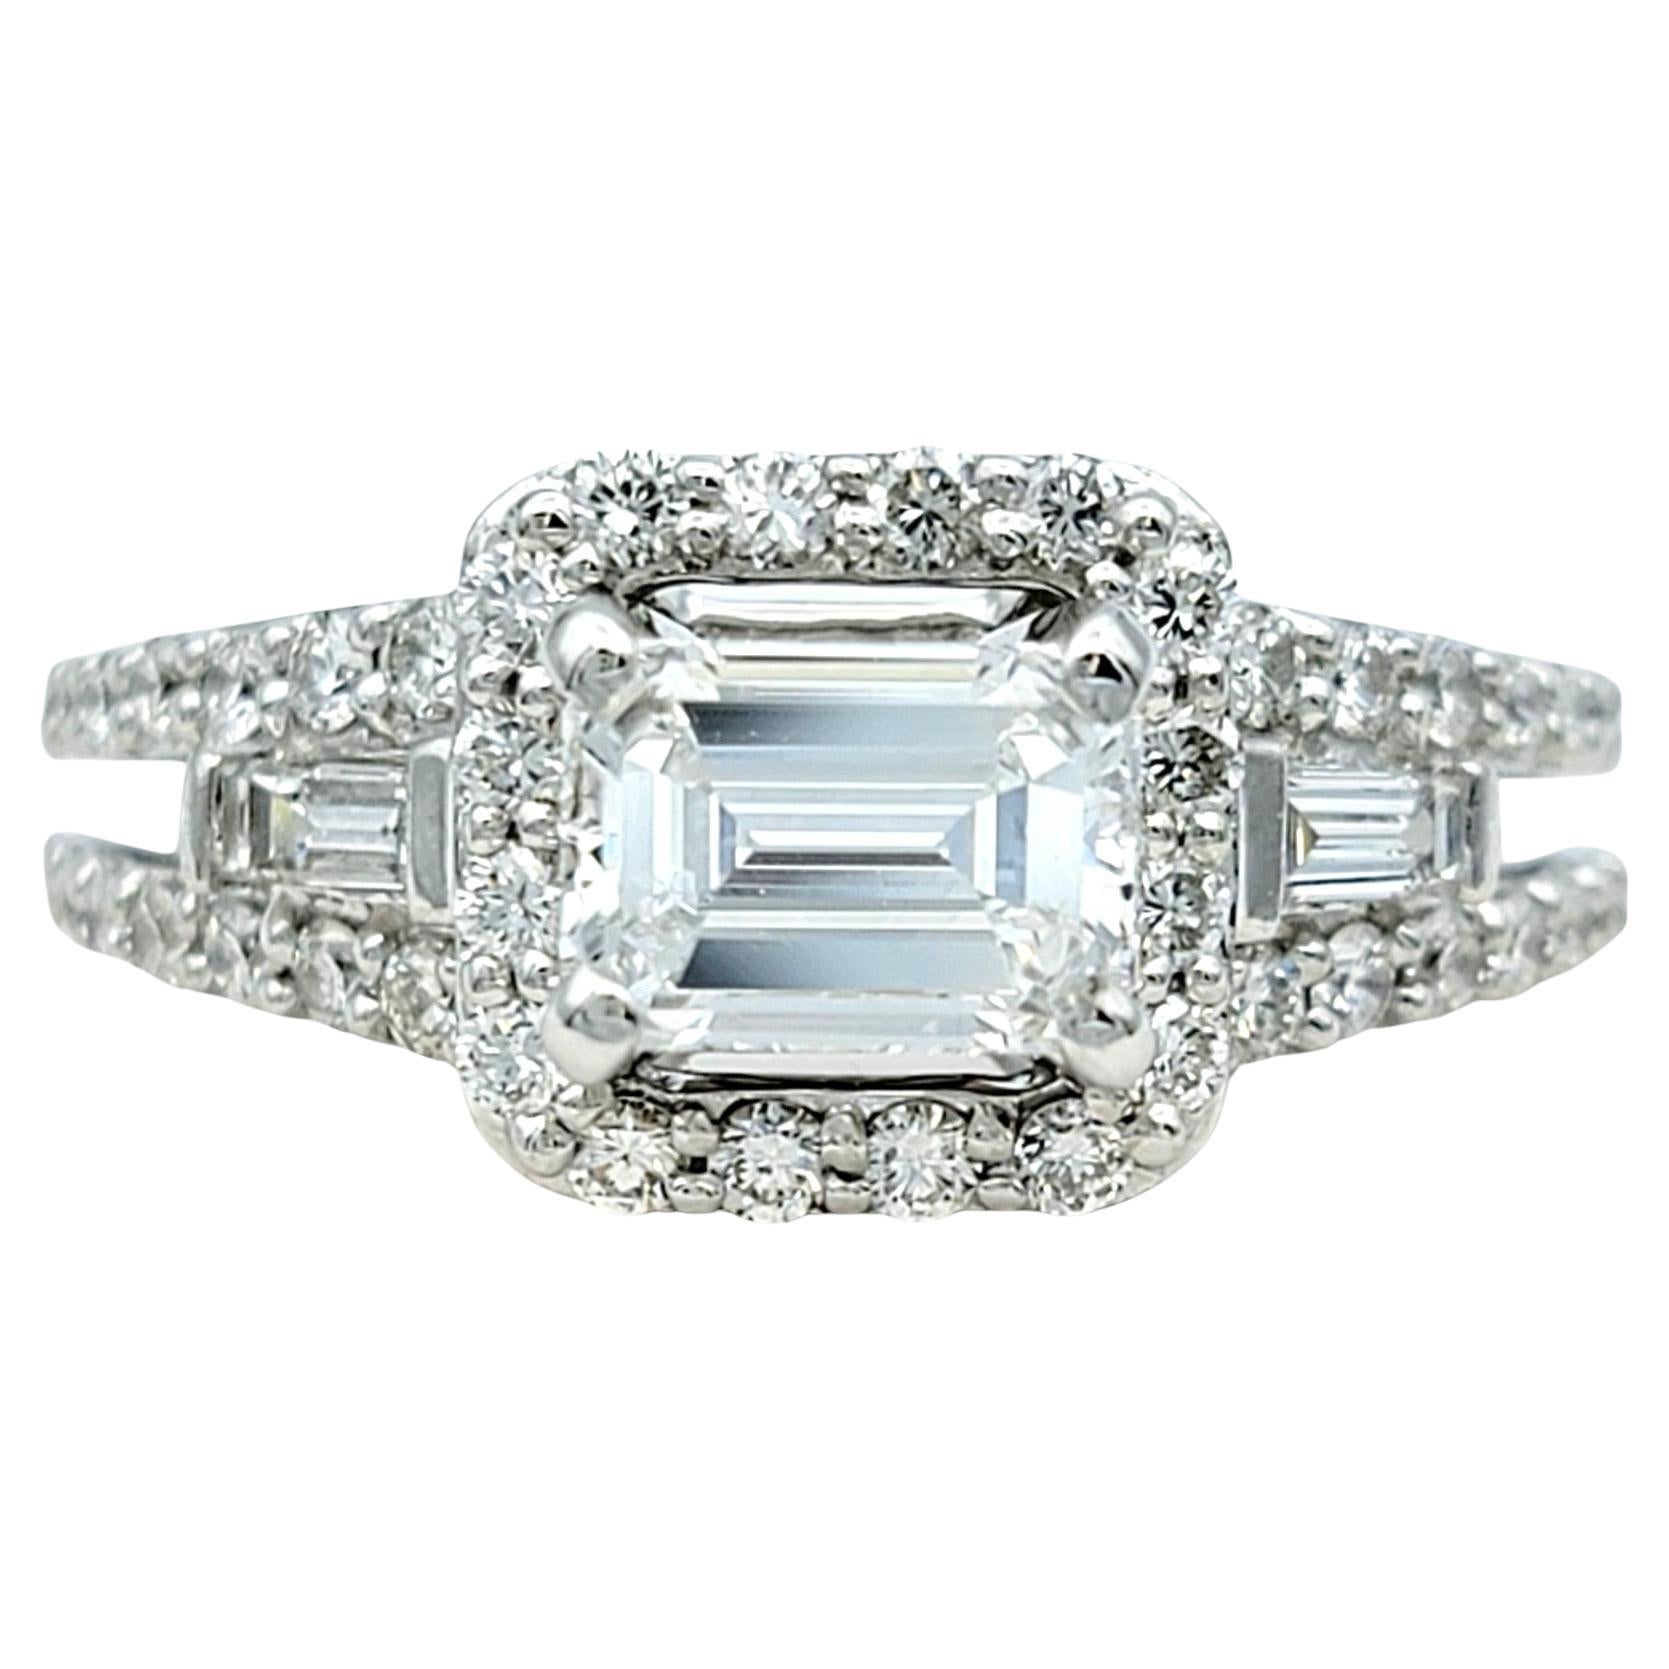 Emerald Cut Diamond and Squared Halo Engagement Ring White Gold, D-E / VVS1-VVS2 For Sale